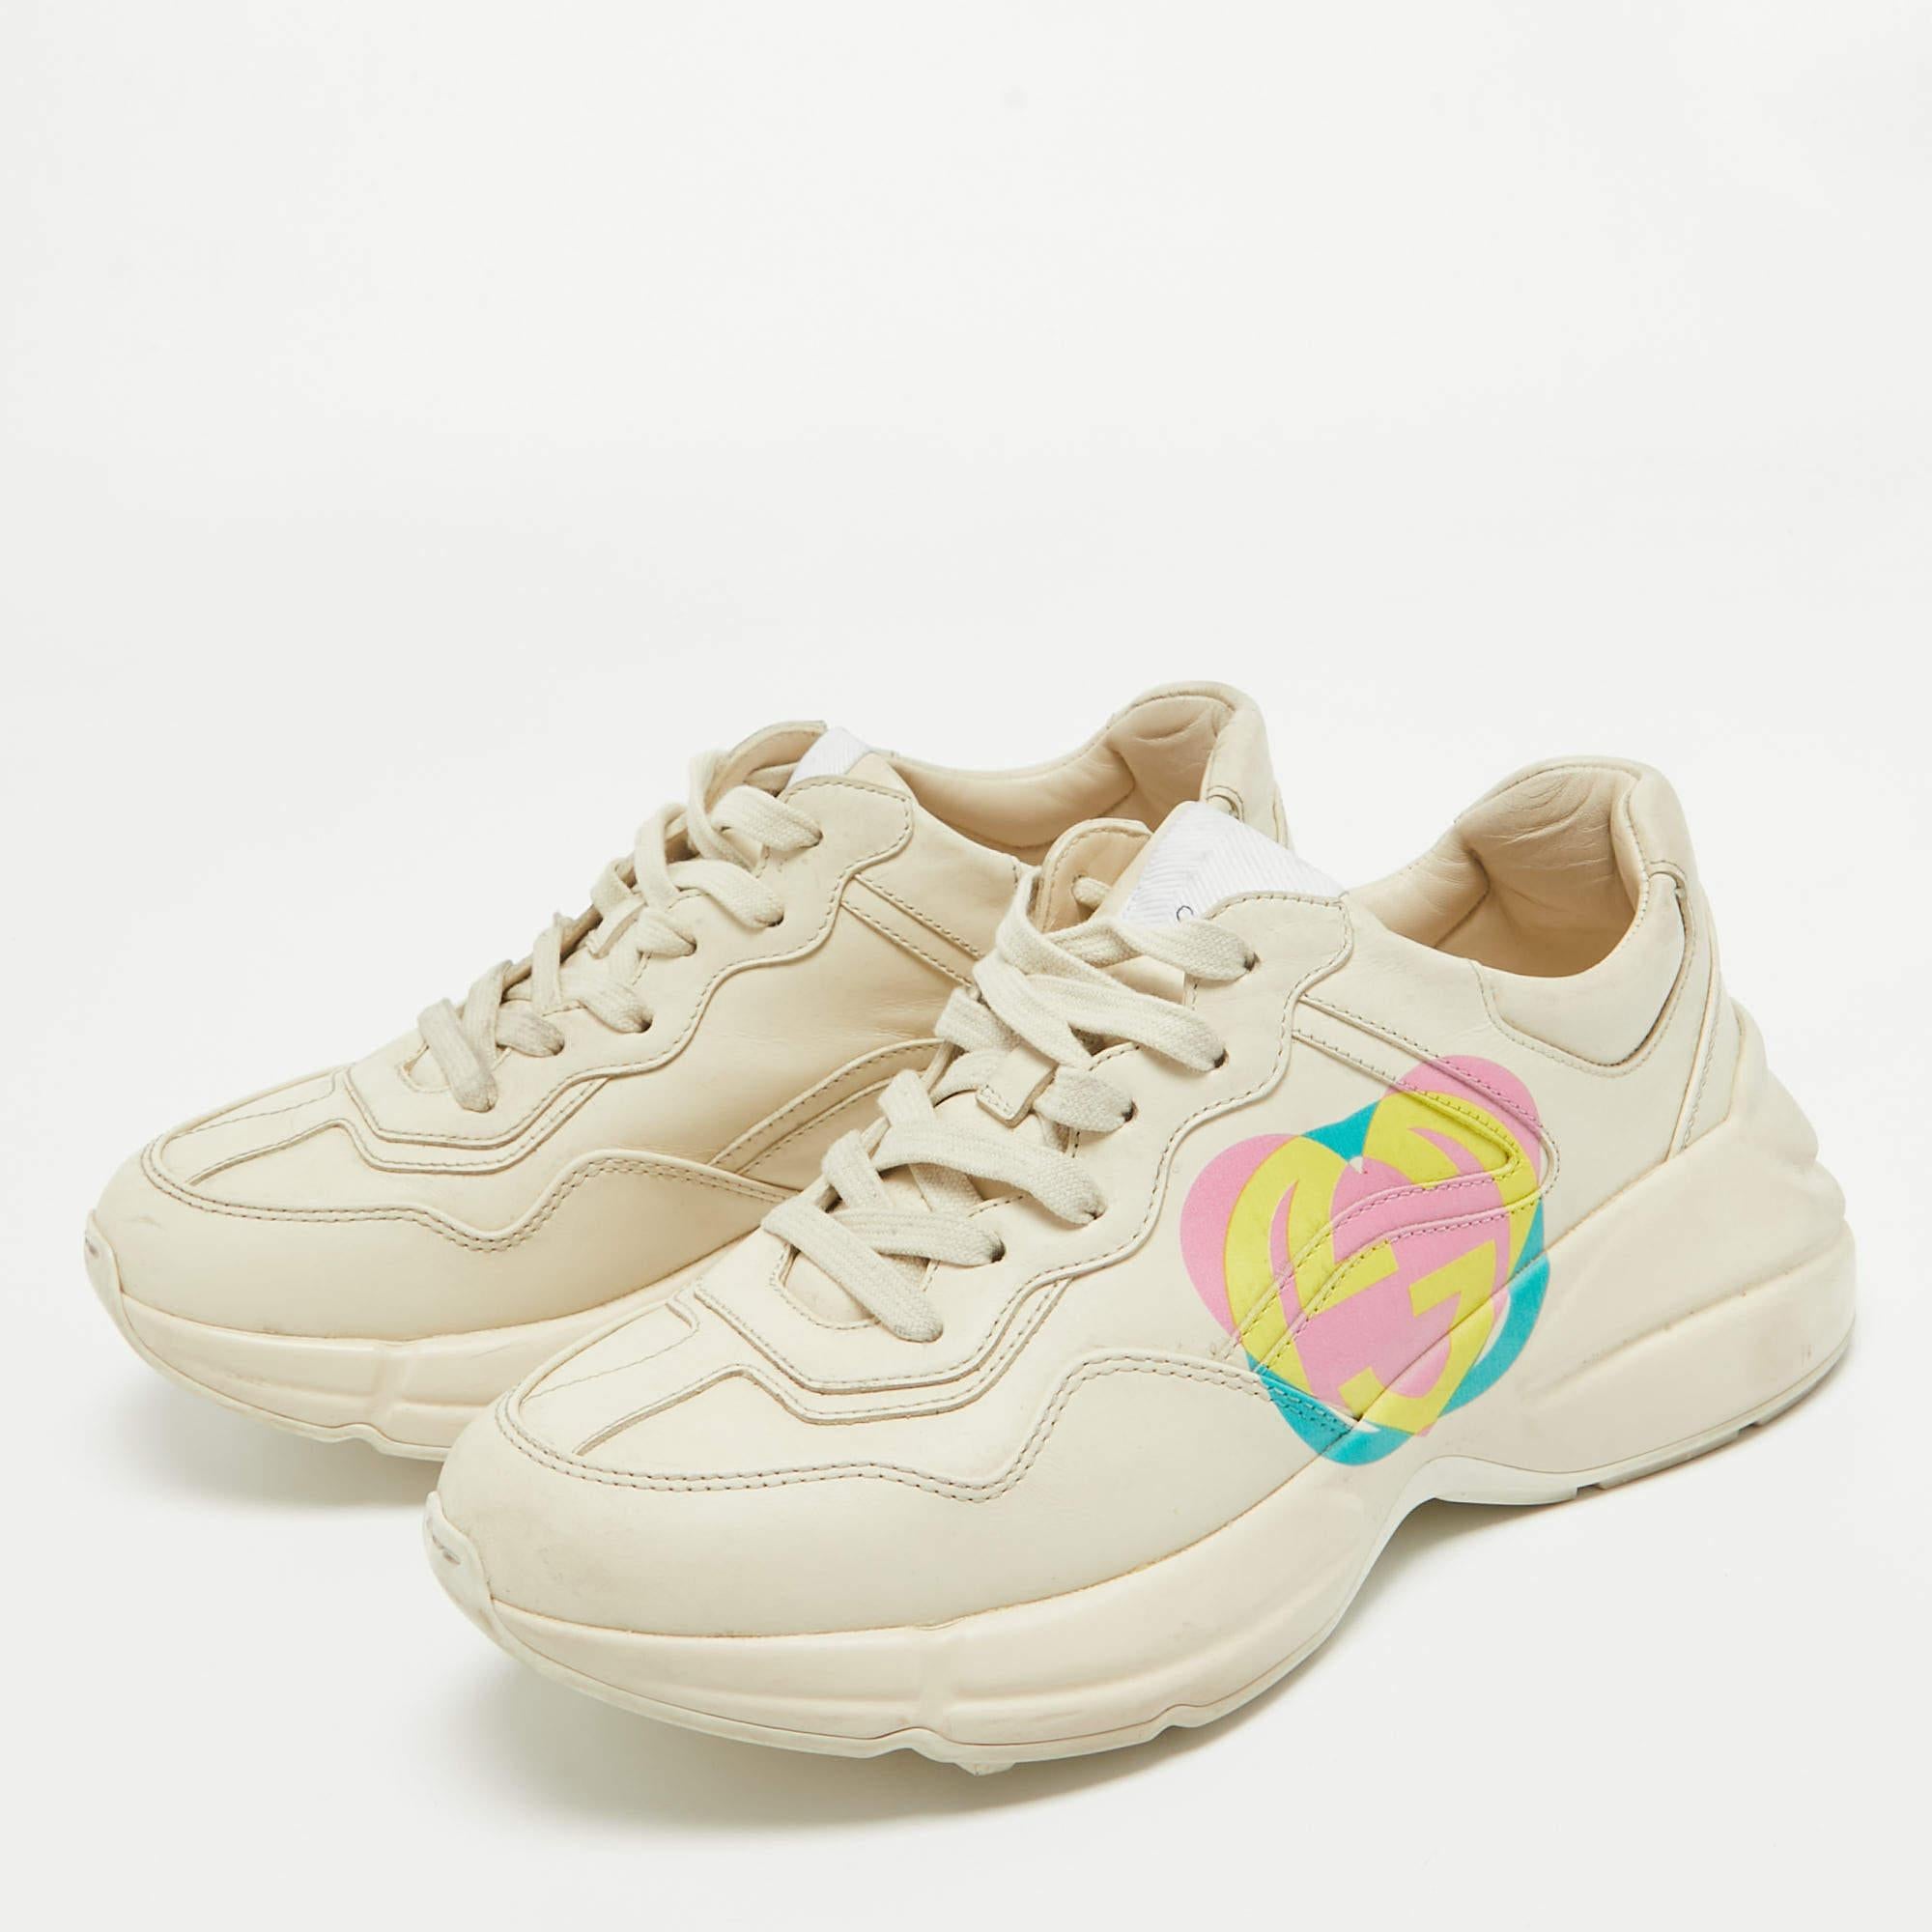 Gucci Cream Leather GG Heart Rhyton Sneakers Size 38 4